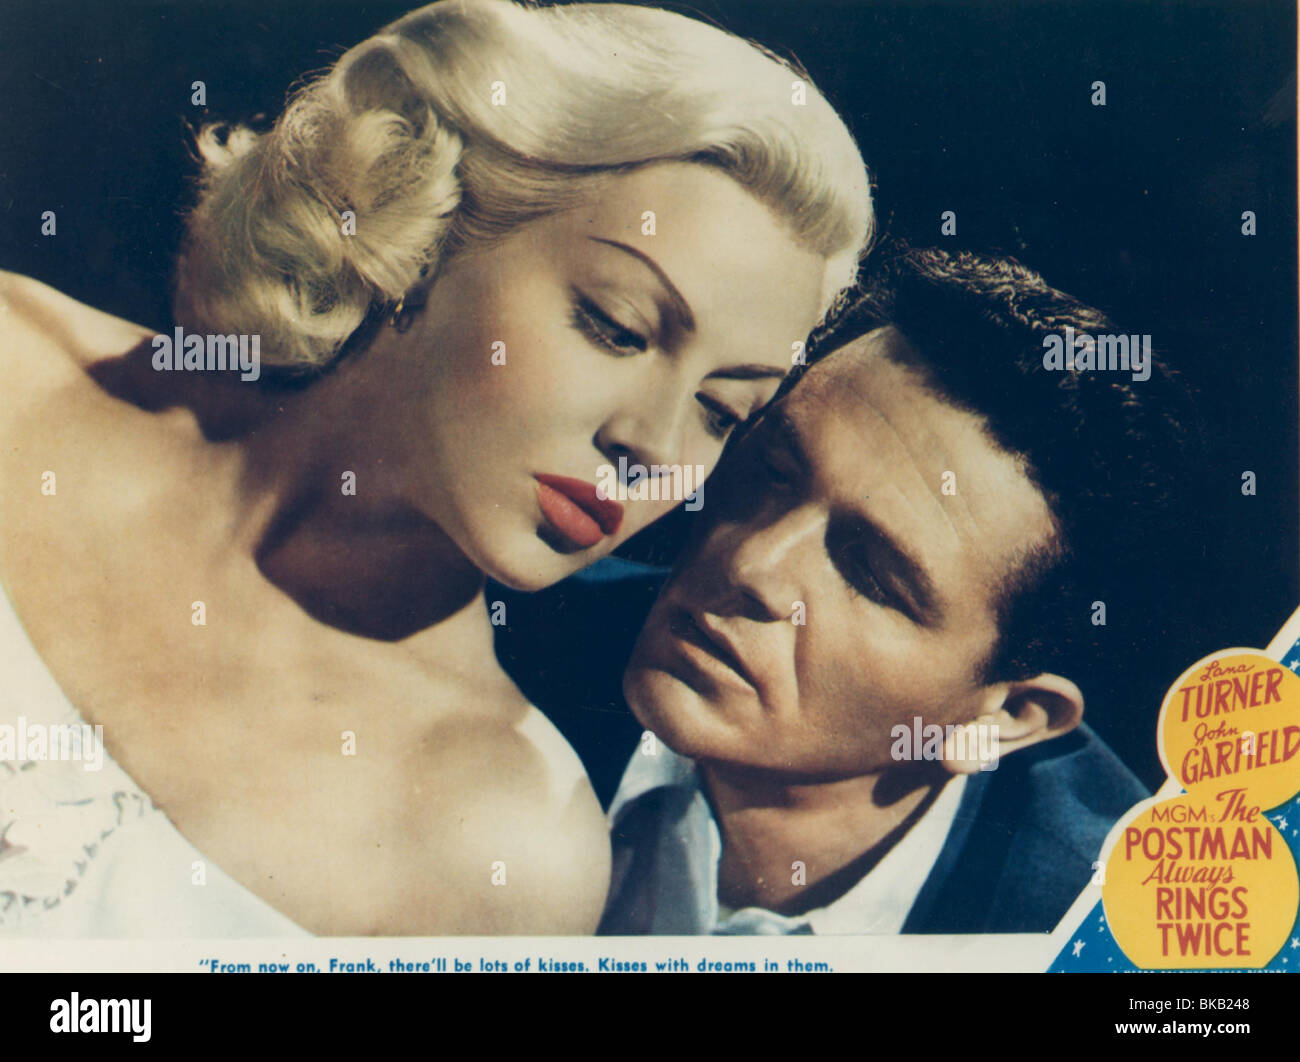 The Postman Always Rings Twice (1946) – The Movie Crash Course